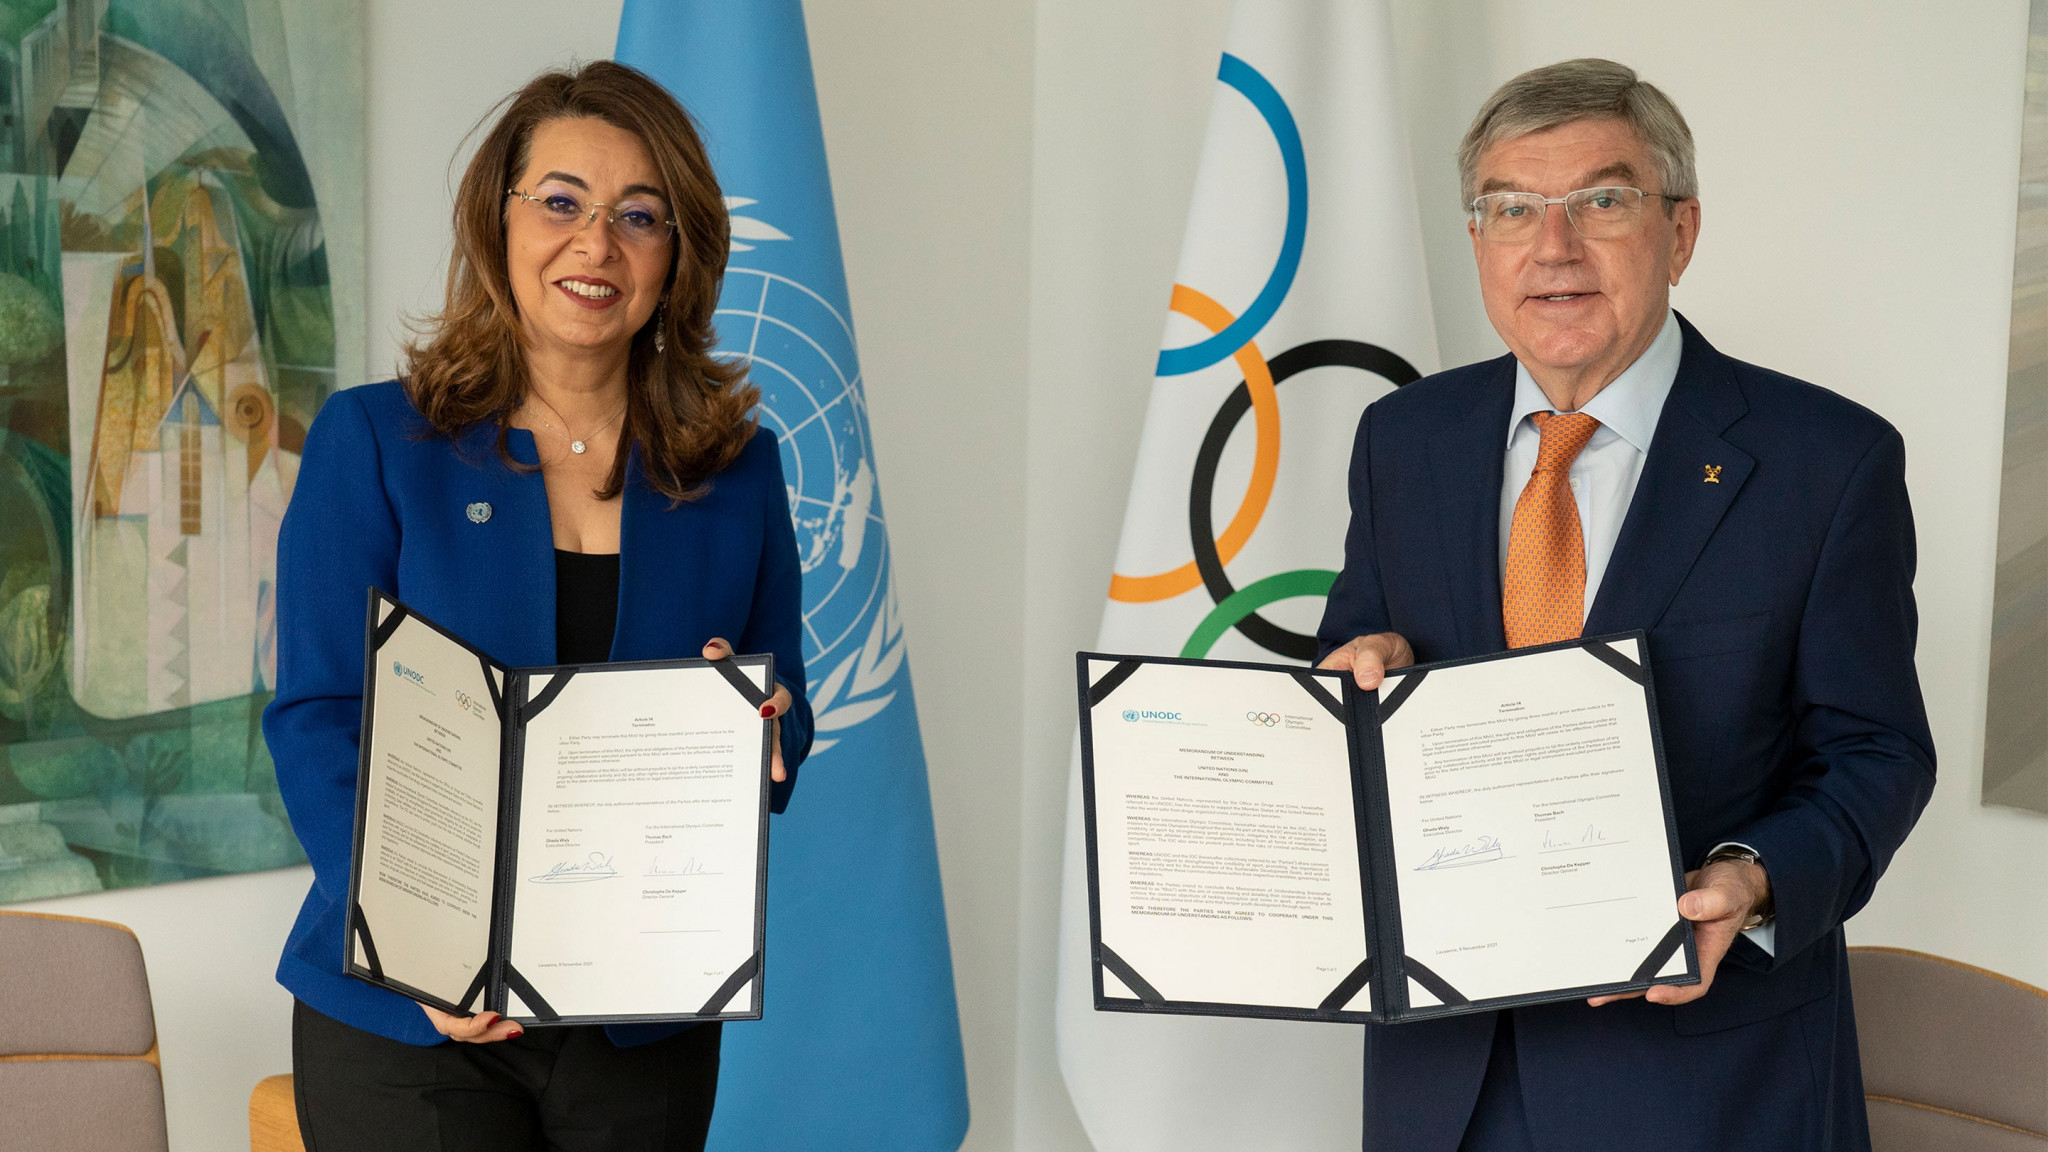 Youth crime focus as IOC and UNODC renew cooperation over sport corruption 